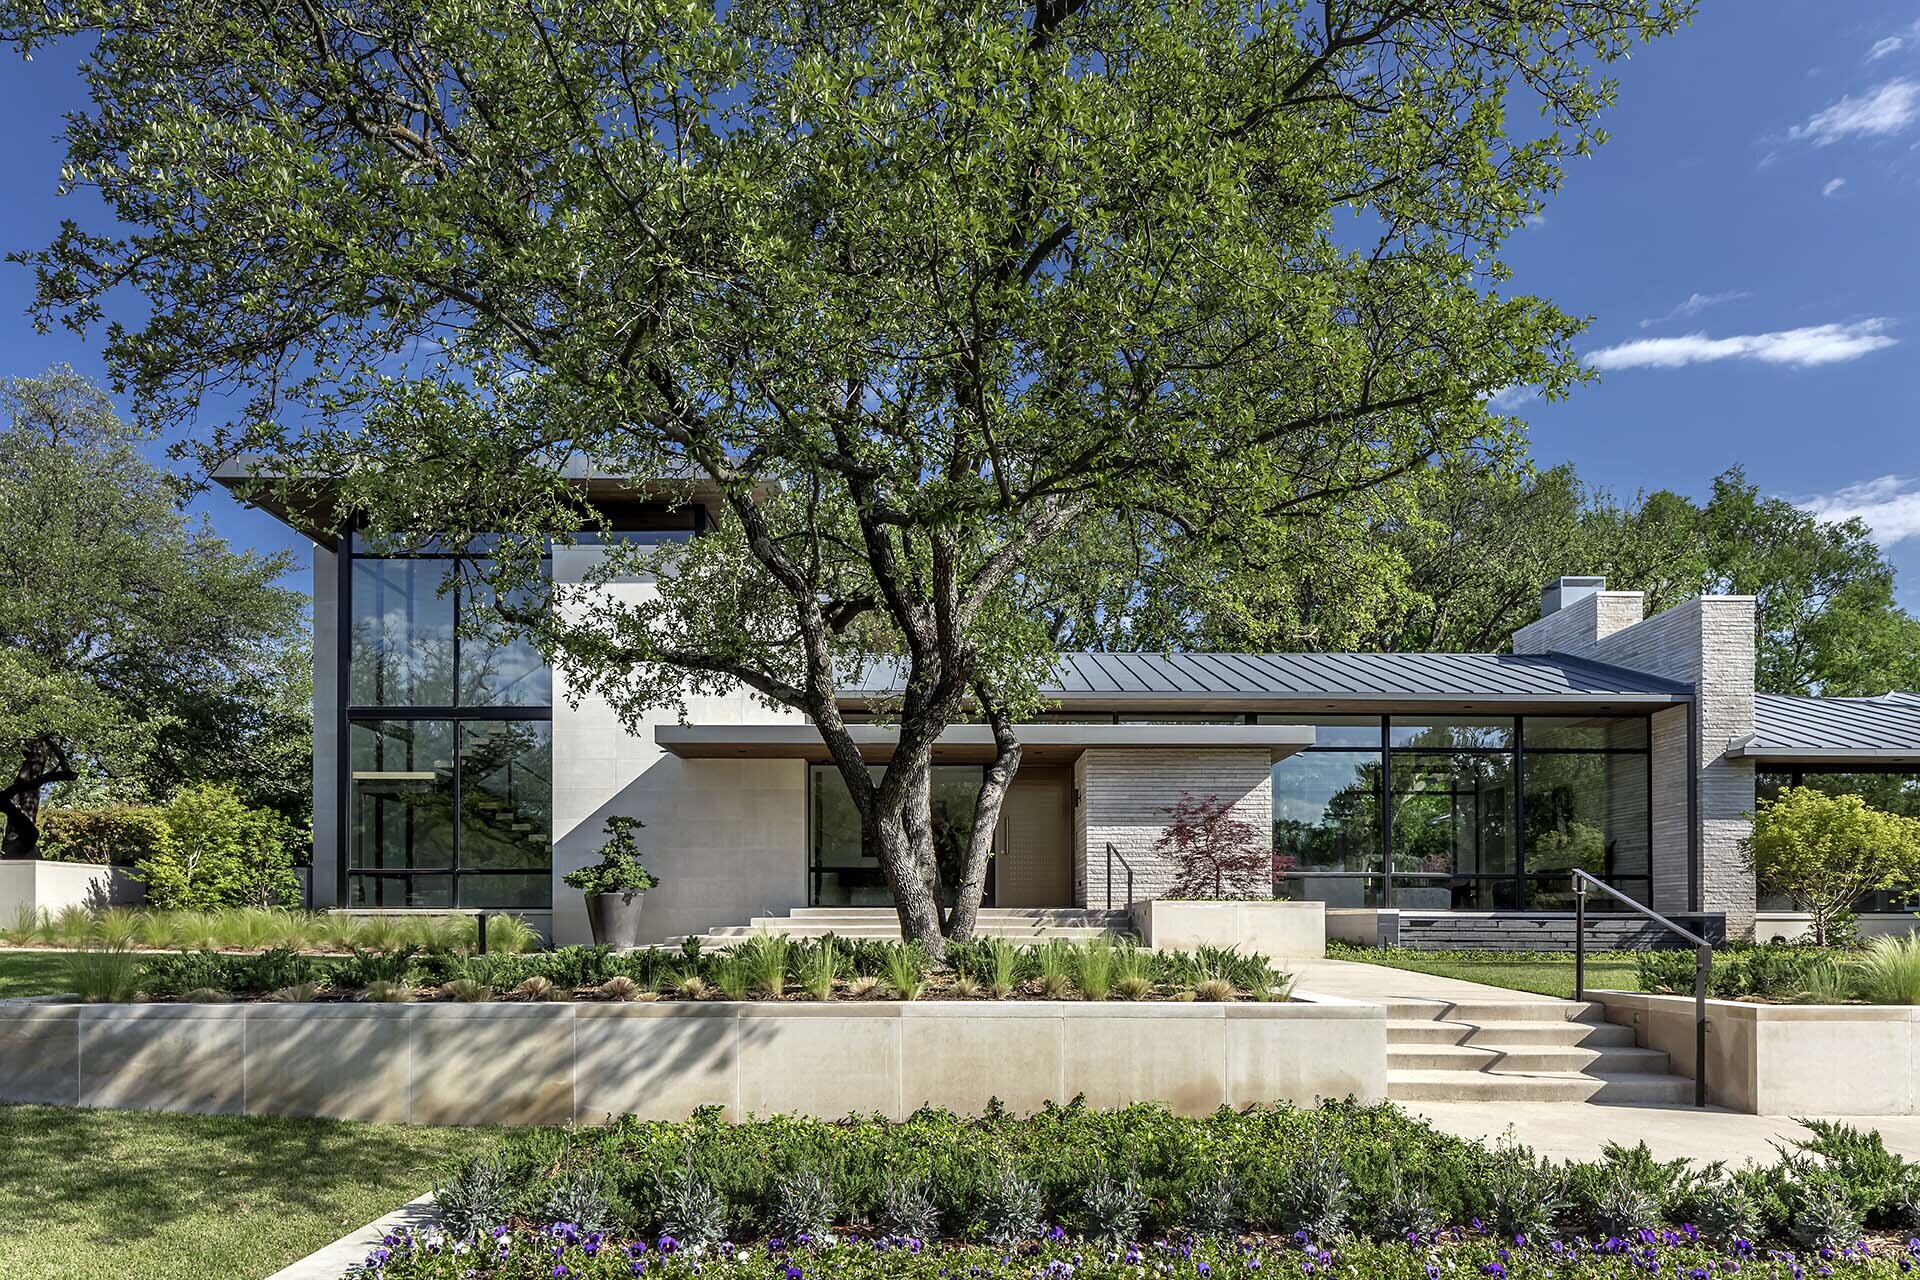  Modern comfortable contemporary home in Preston Hollow Dallas Texas designed by Bernbaum/Magadini Architects featuring expansive views through glass walls 